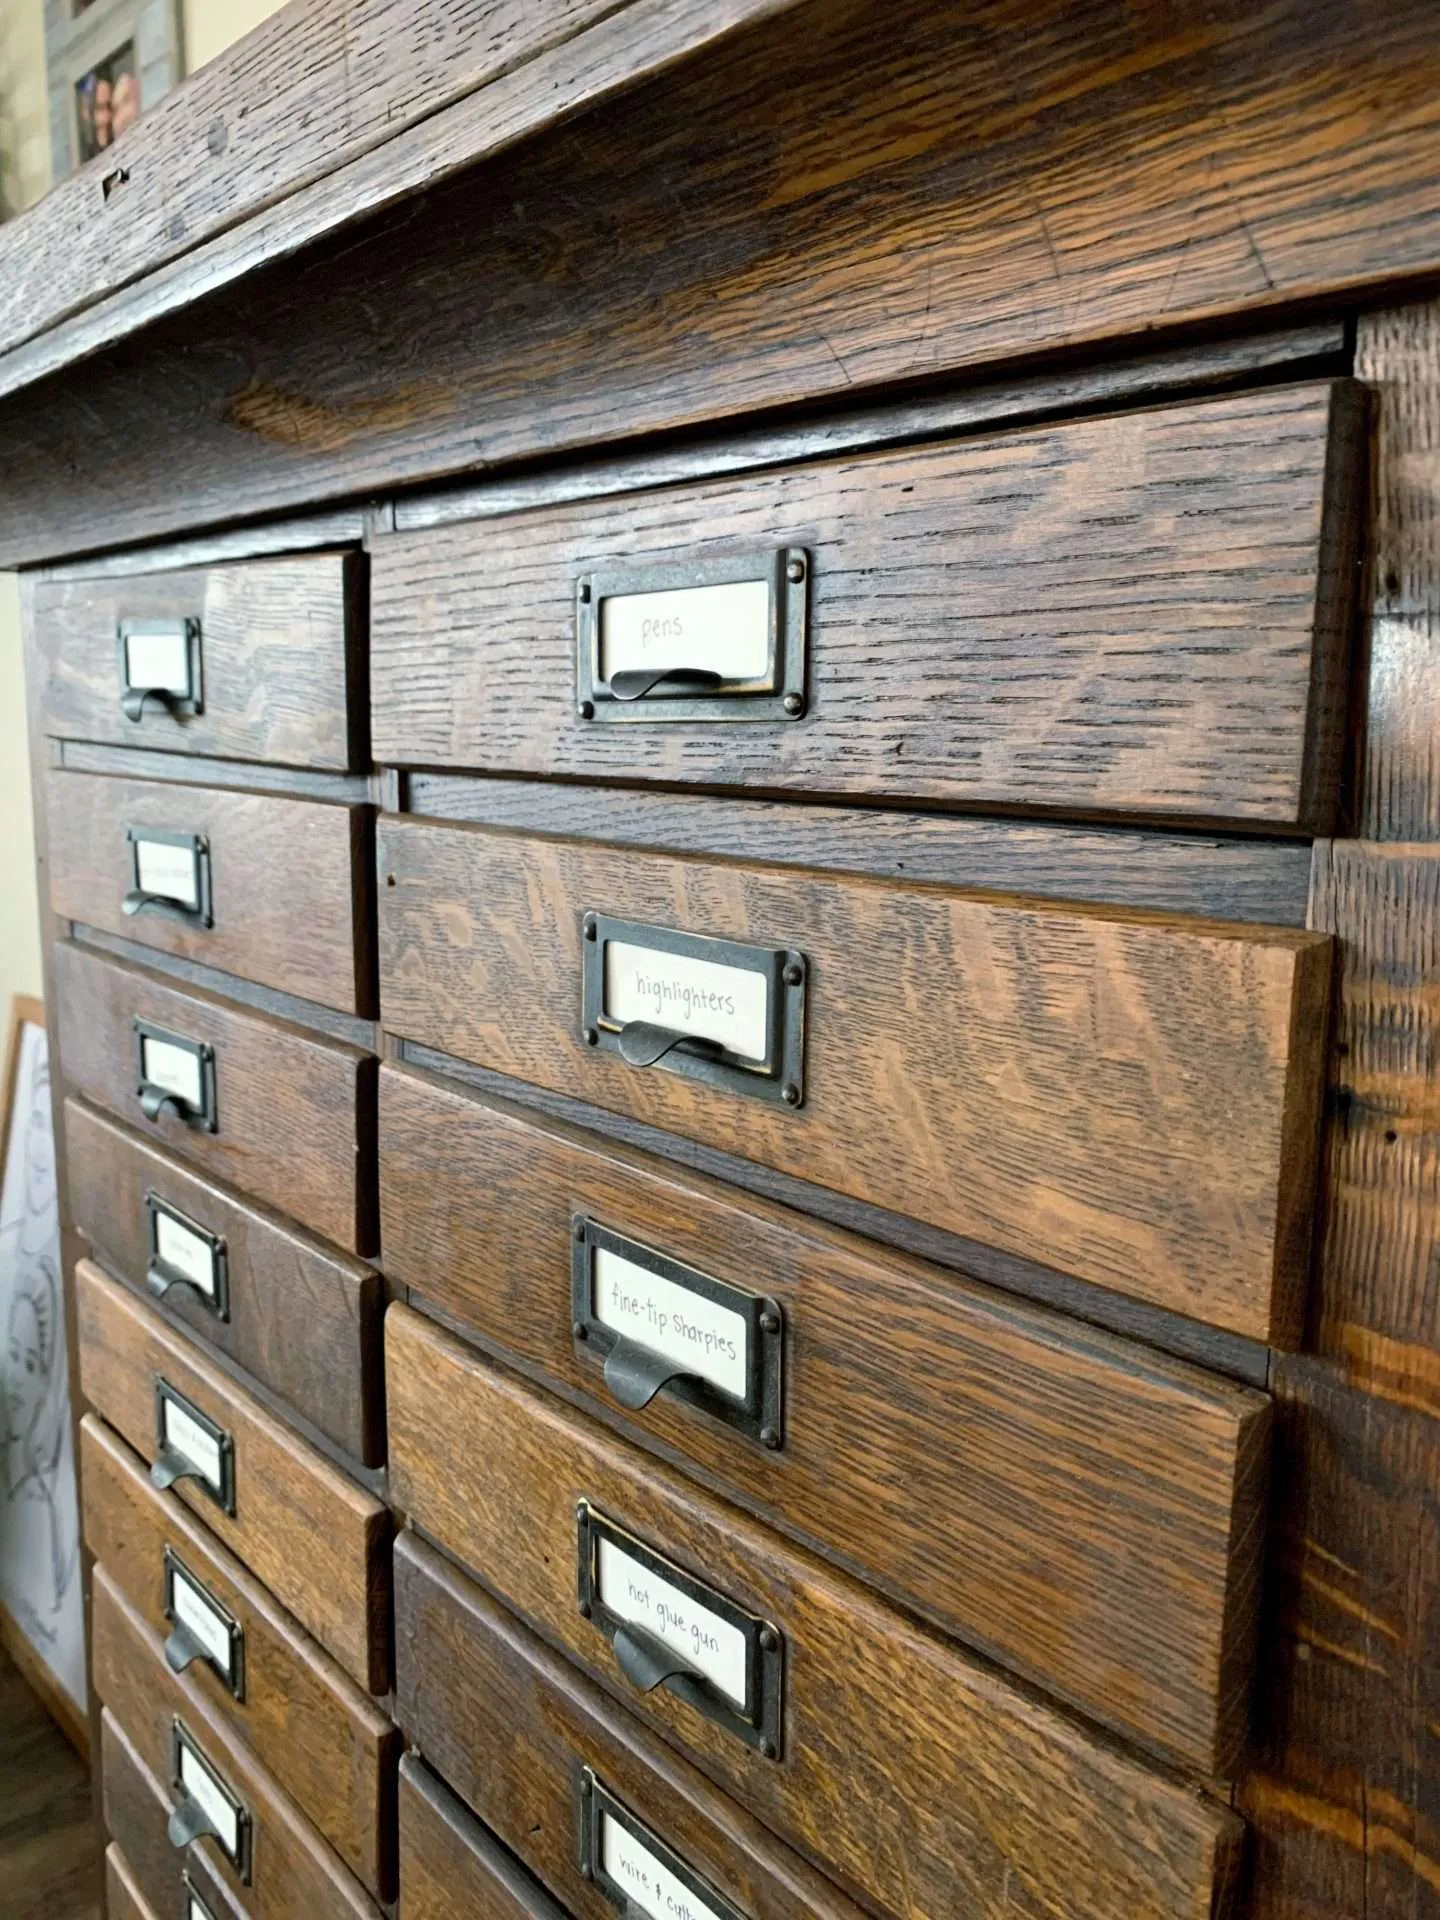 Drawers and labels on an antique hardware cabinet.